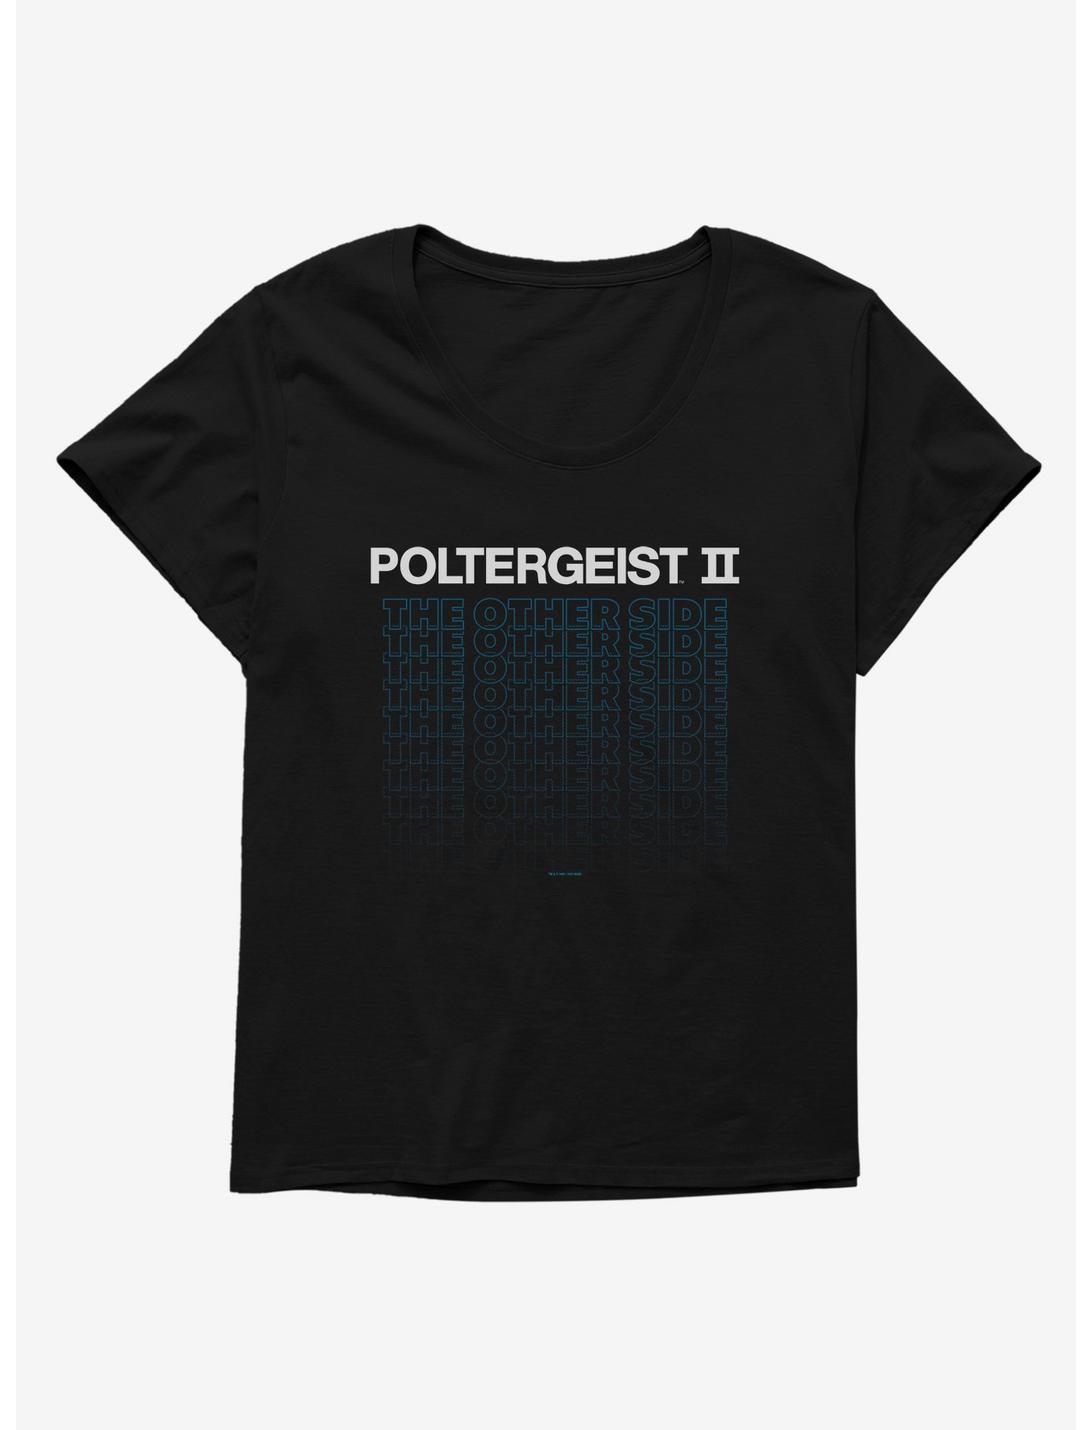 Poltergeist II The Other Side Womens T-Shirt Plus Size, BLACK, hi-res